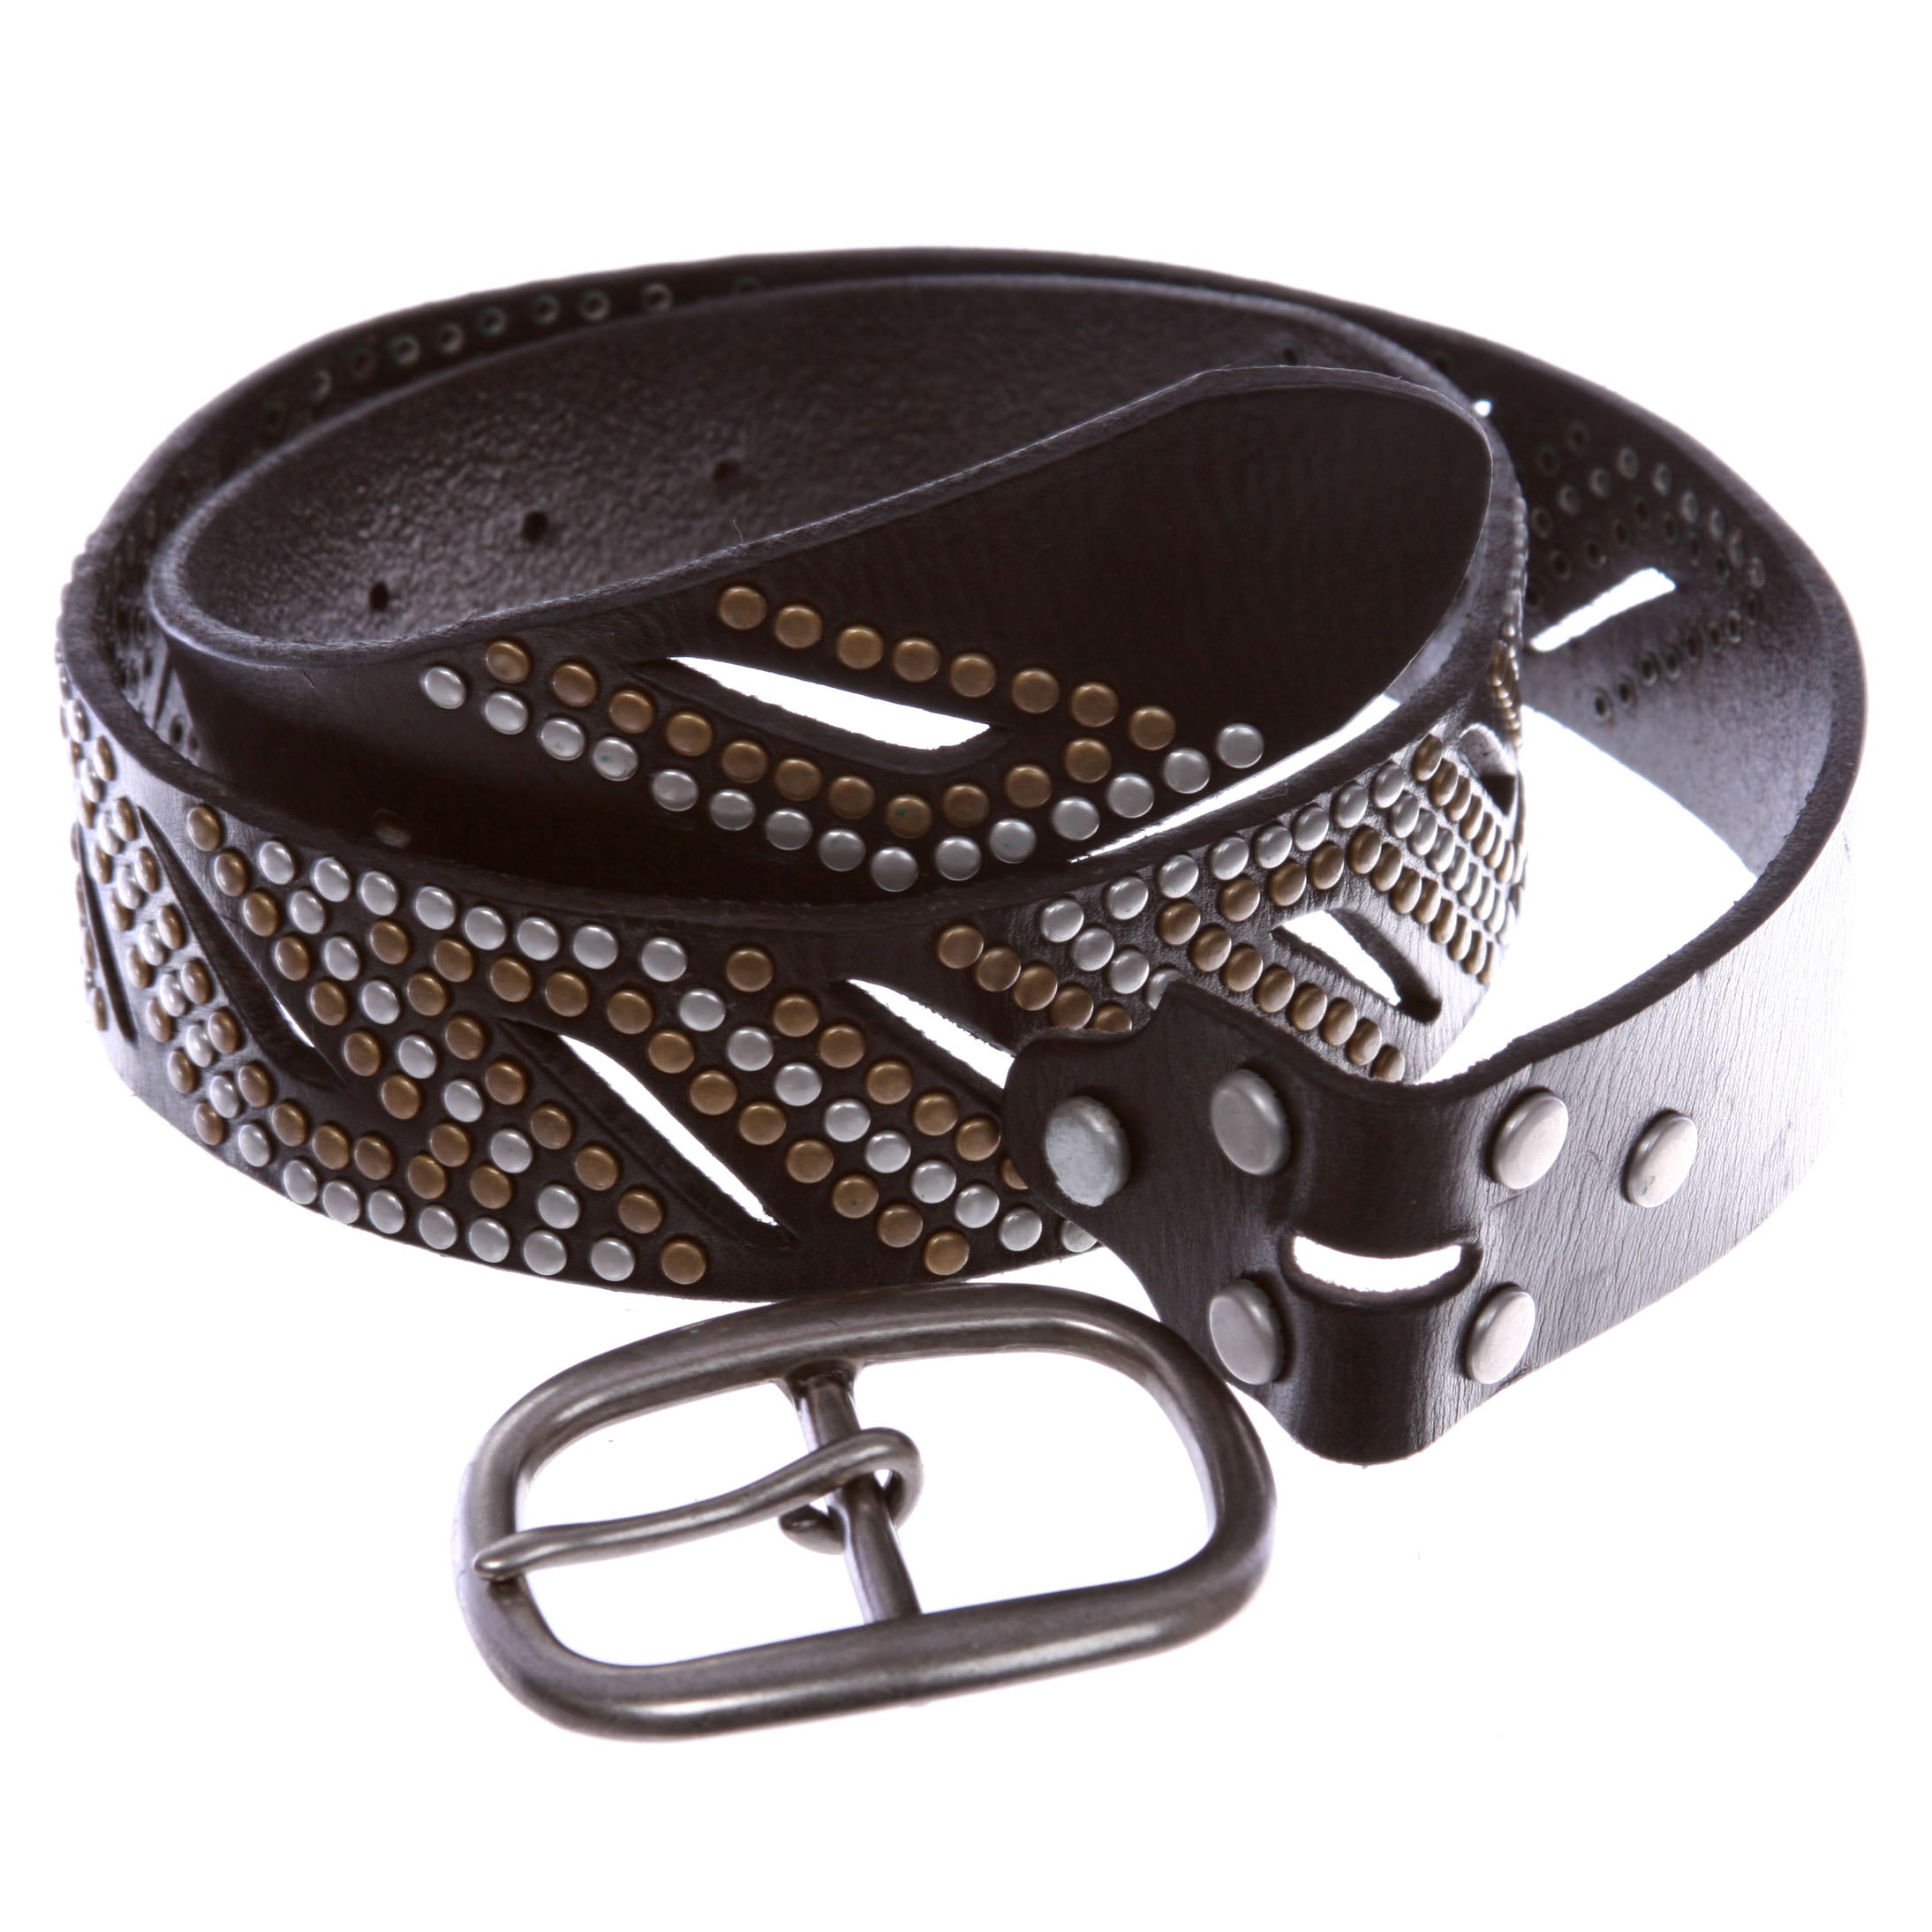 1 1/2" Oval Snap on Perforated Nailhead Studded Cowhide Solid Leather Belt